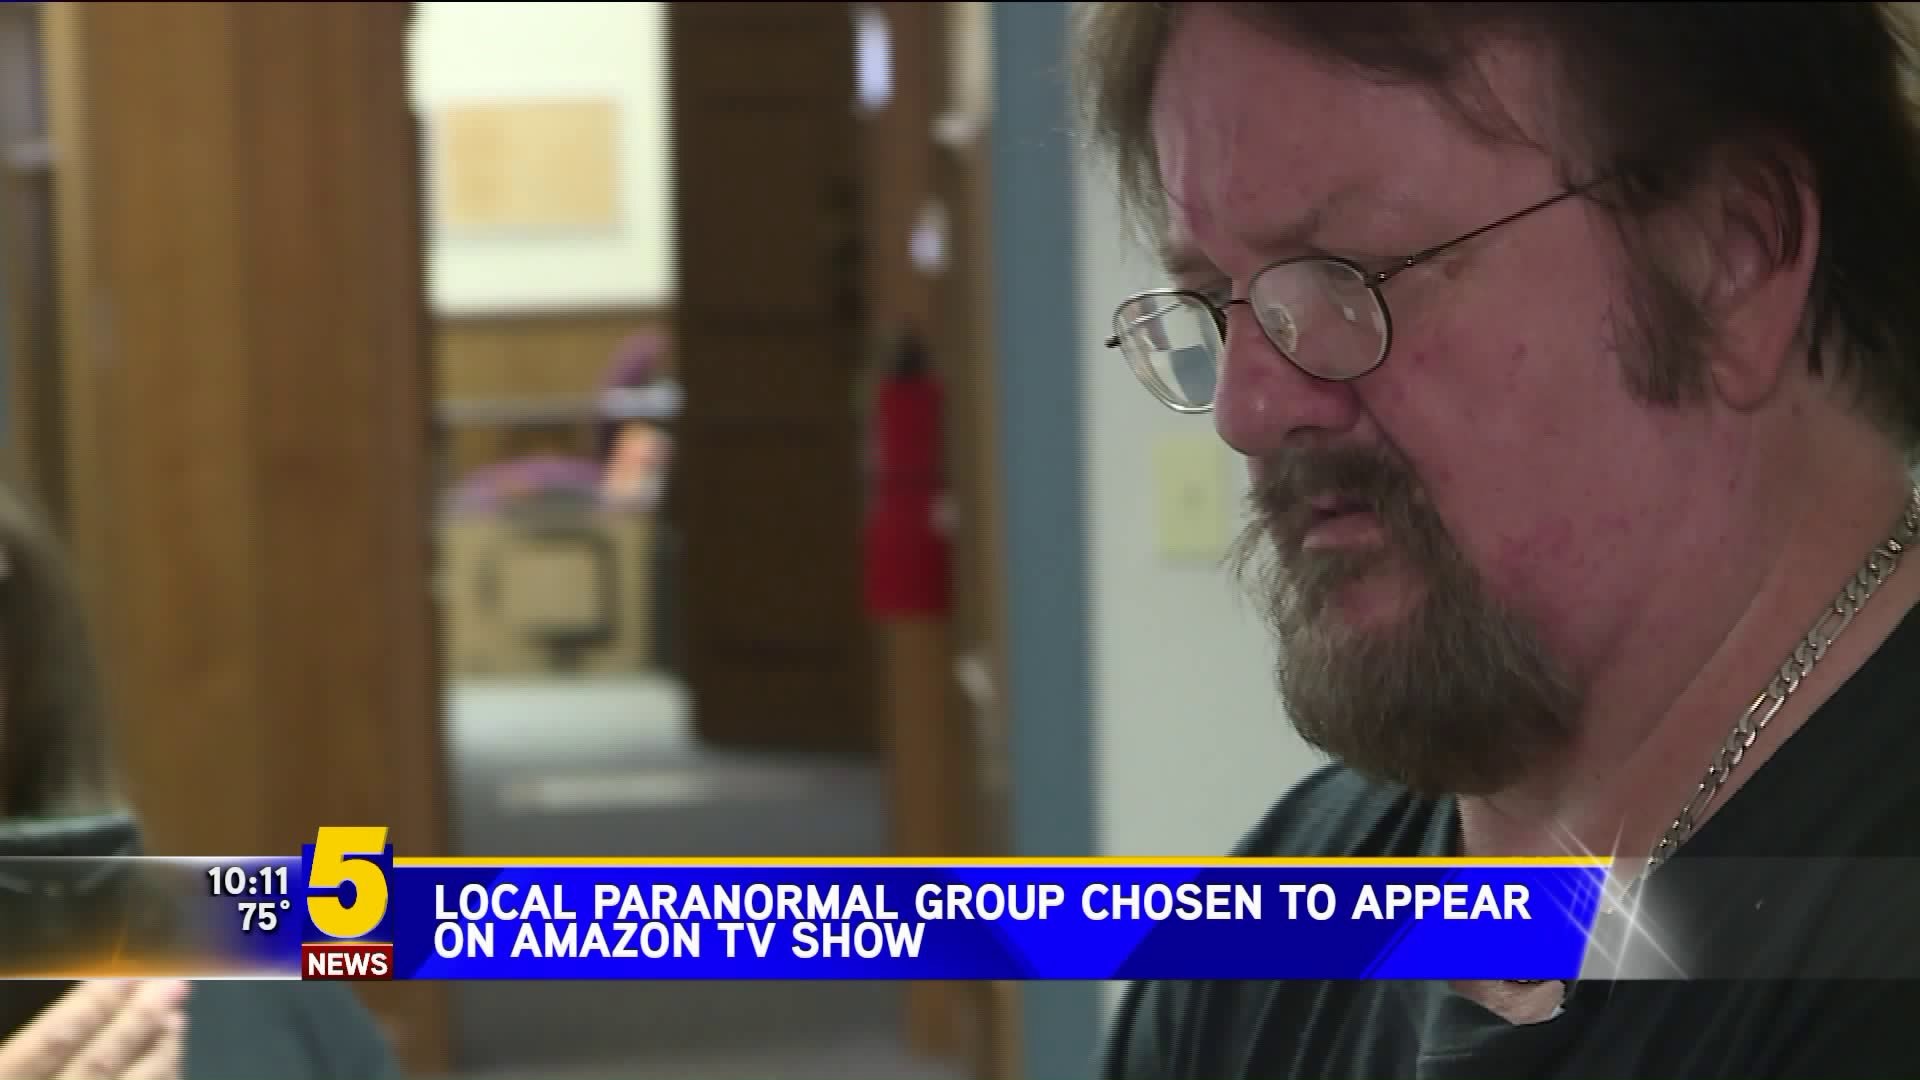 Local Paranormal Group Chosen to Appear on Amazon TV Show